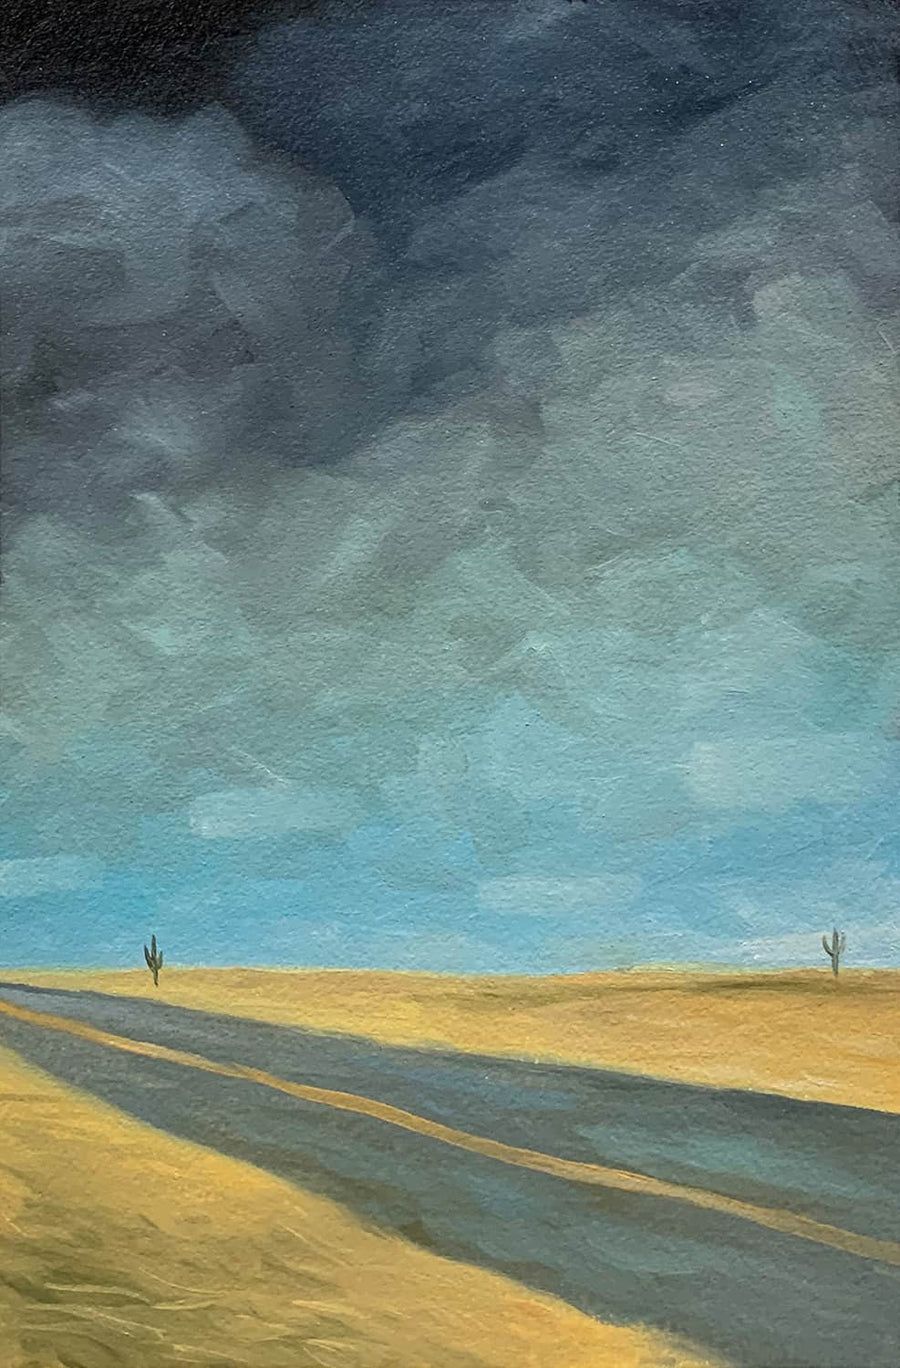 Desert Road Paintings with Storms